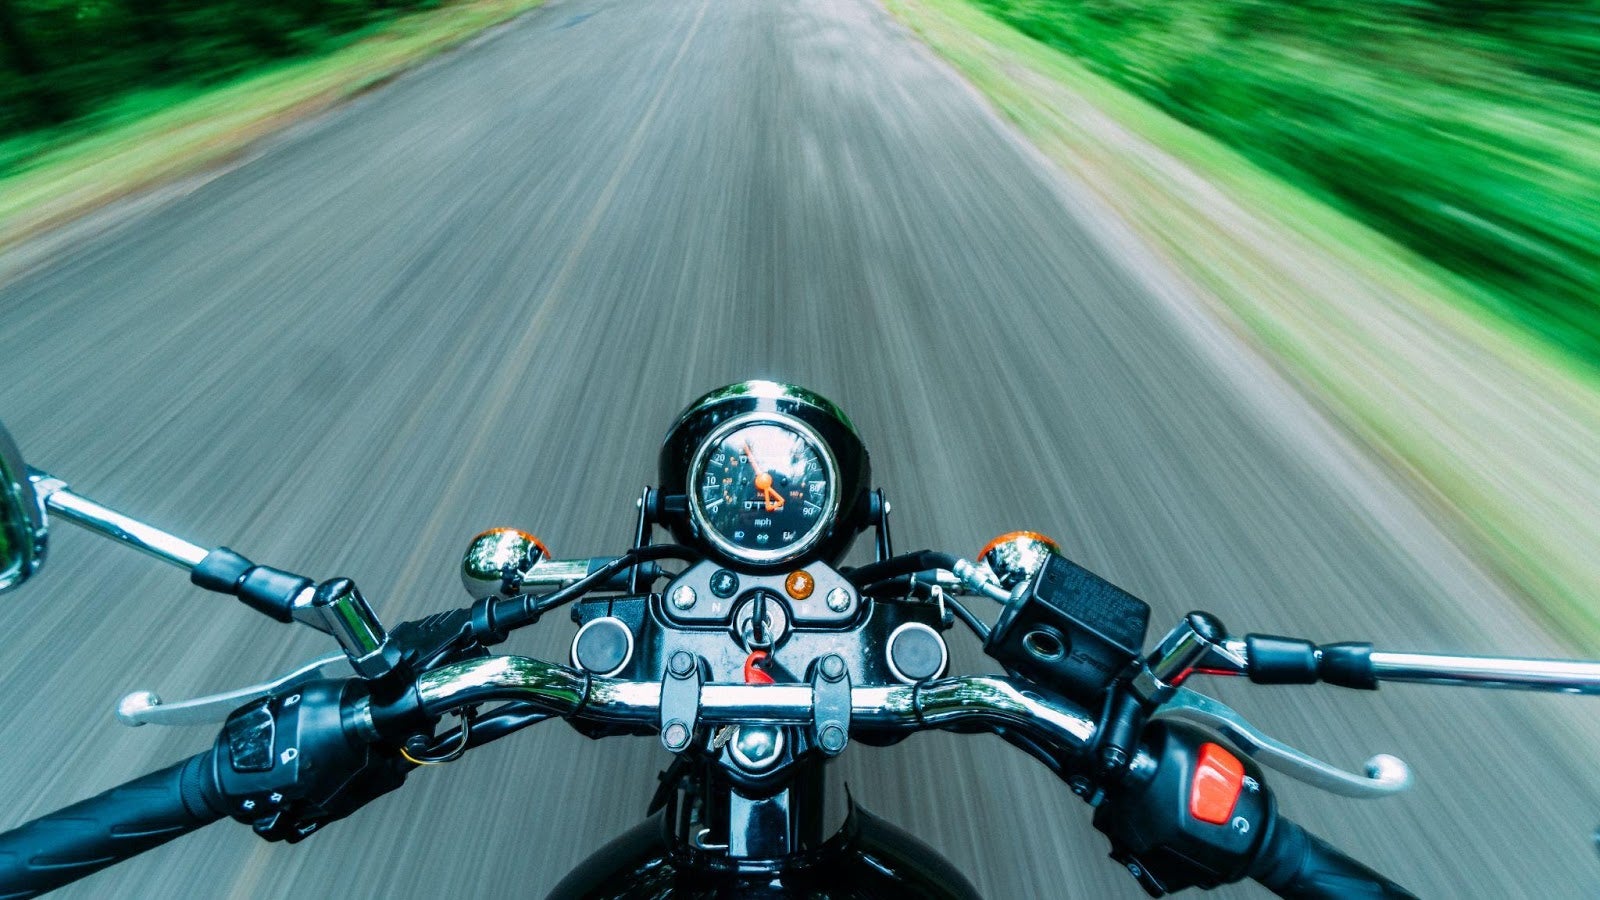 How to Get the Best Deal for Motorcycle Insurance in Singapore